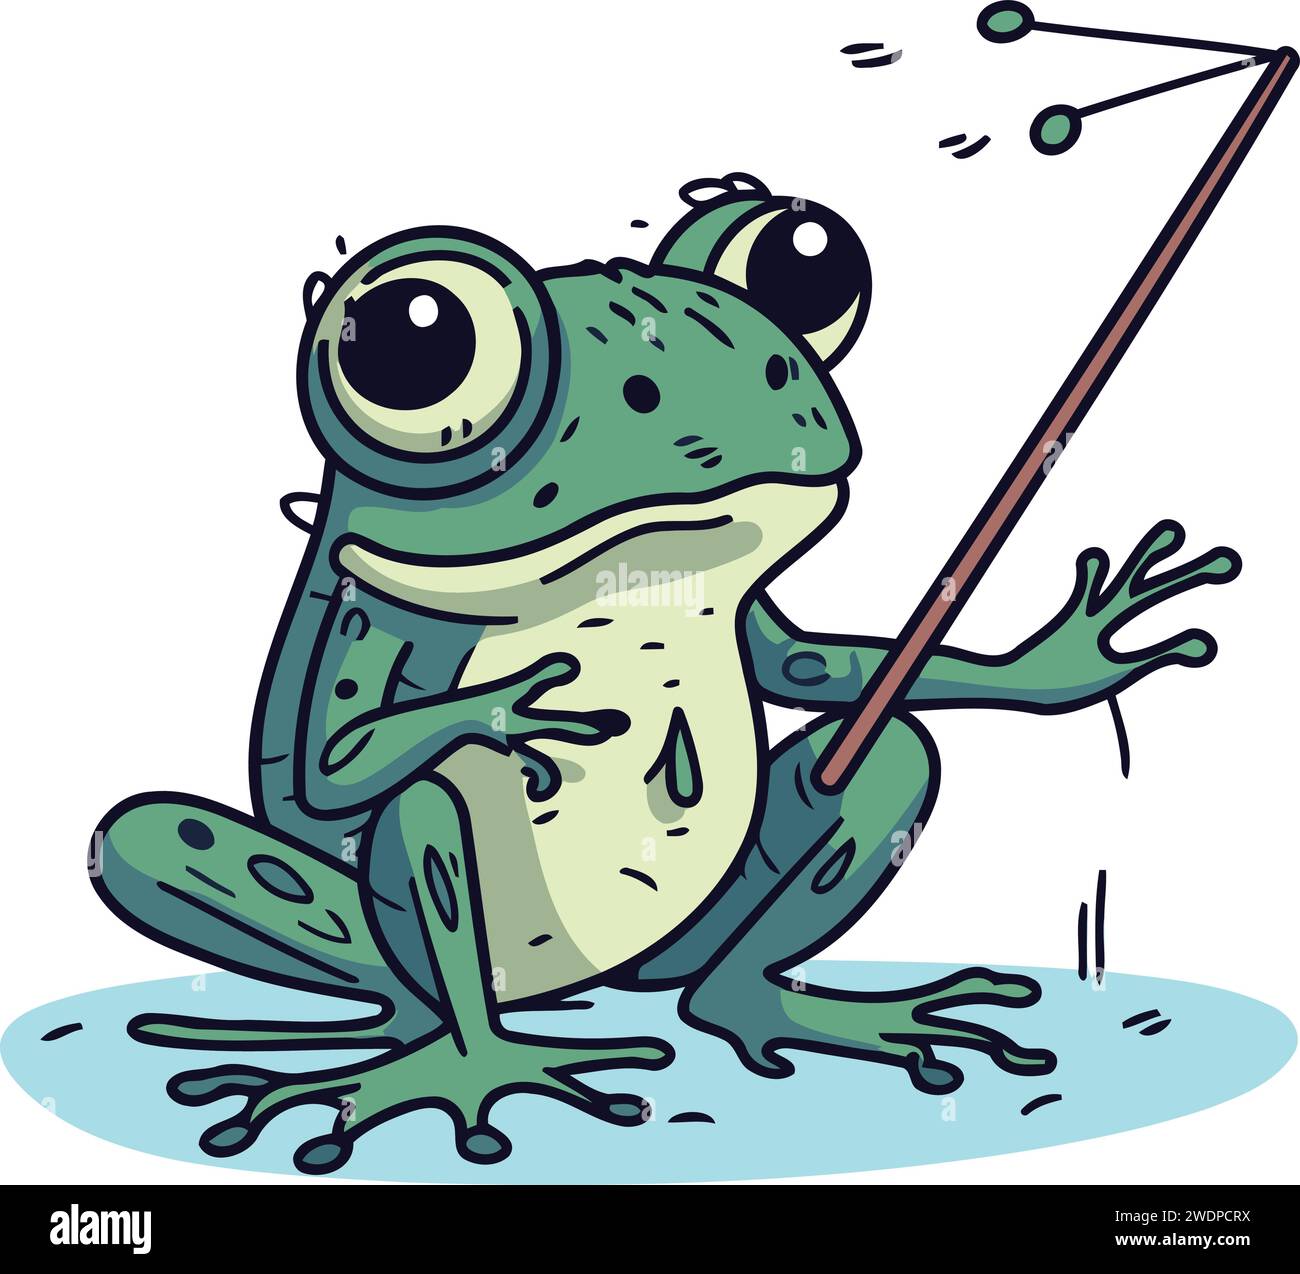 Fishing frogs Stock Vector Images - Alamy